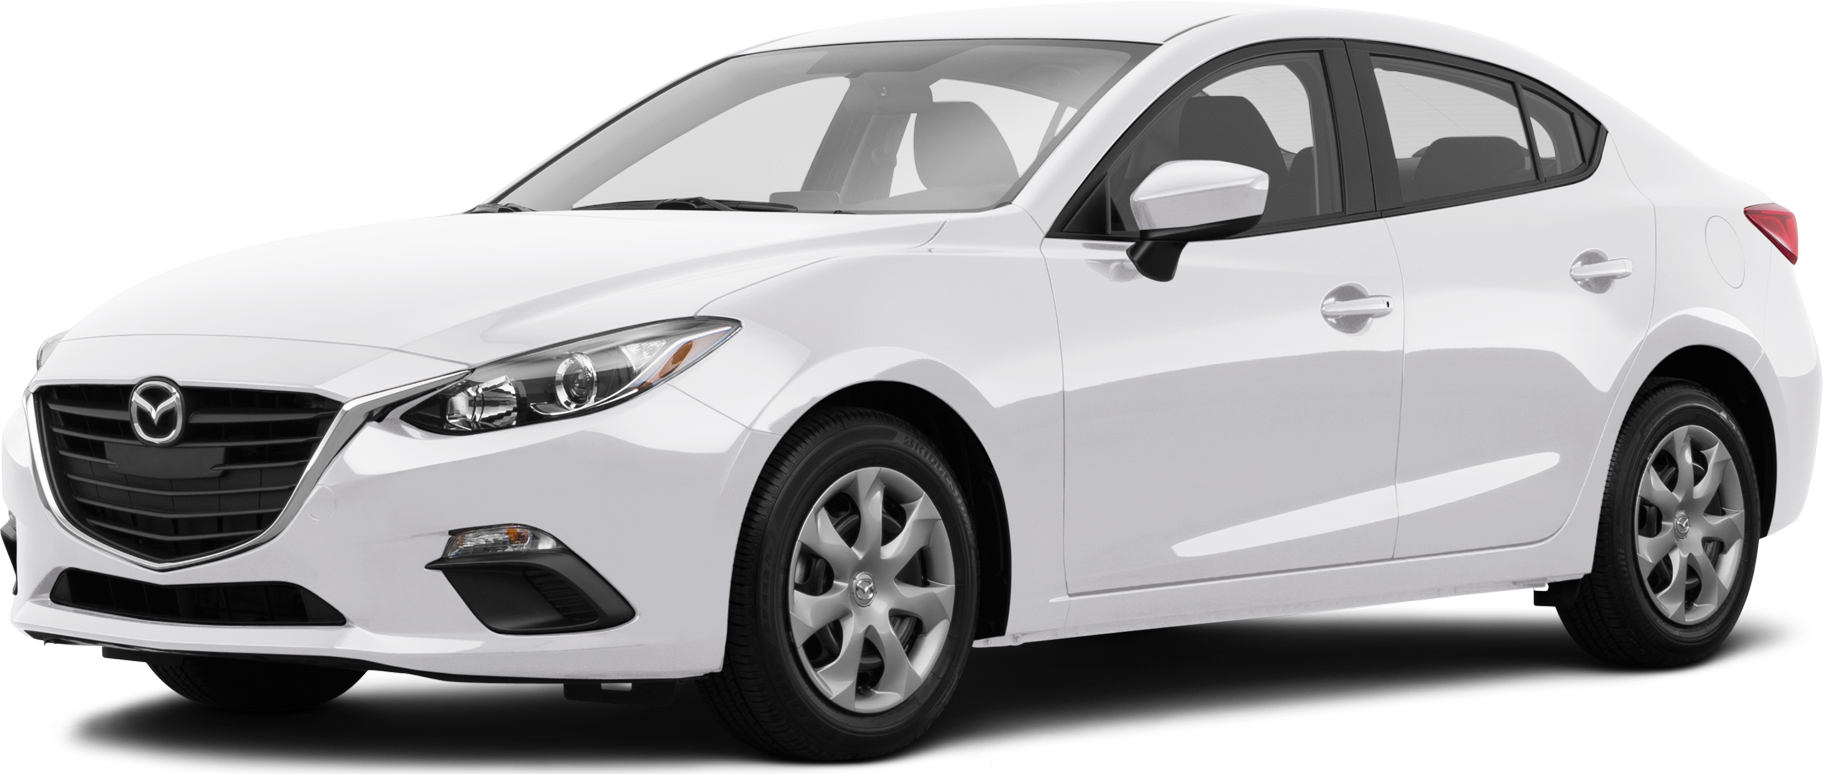 Mazda 3 2015 10Best Cars 8211 Feature 8211 Car and Driver